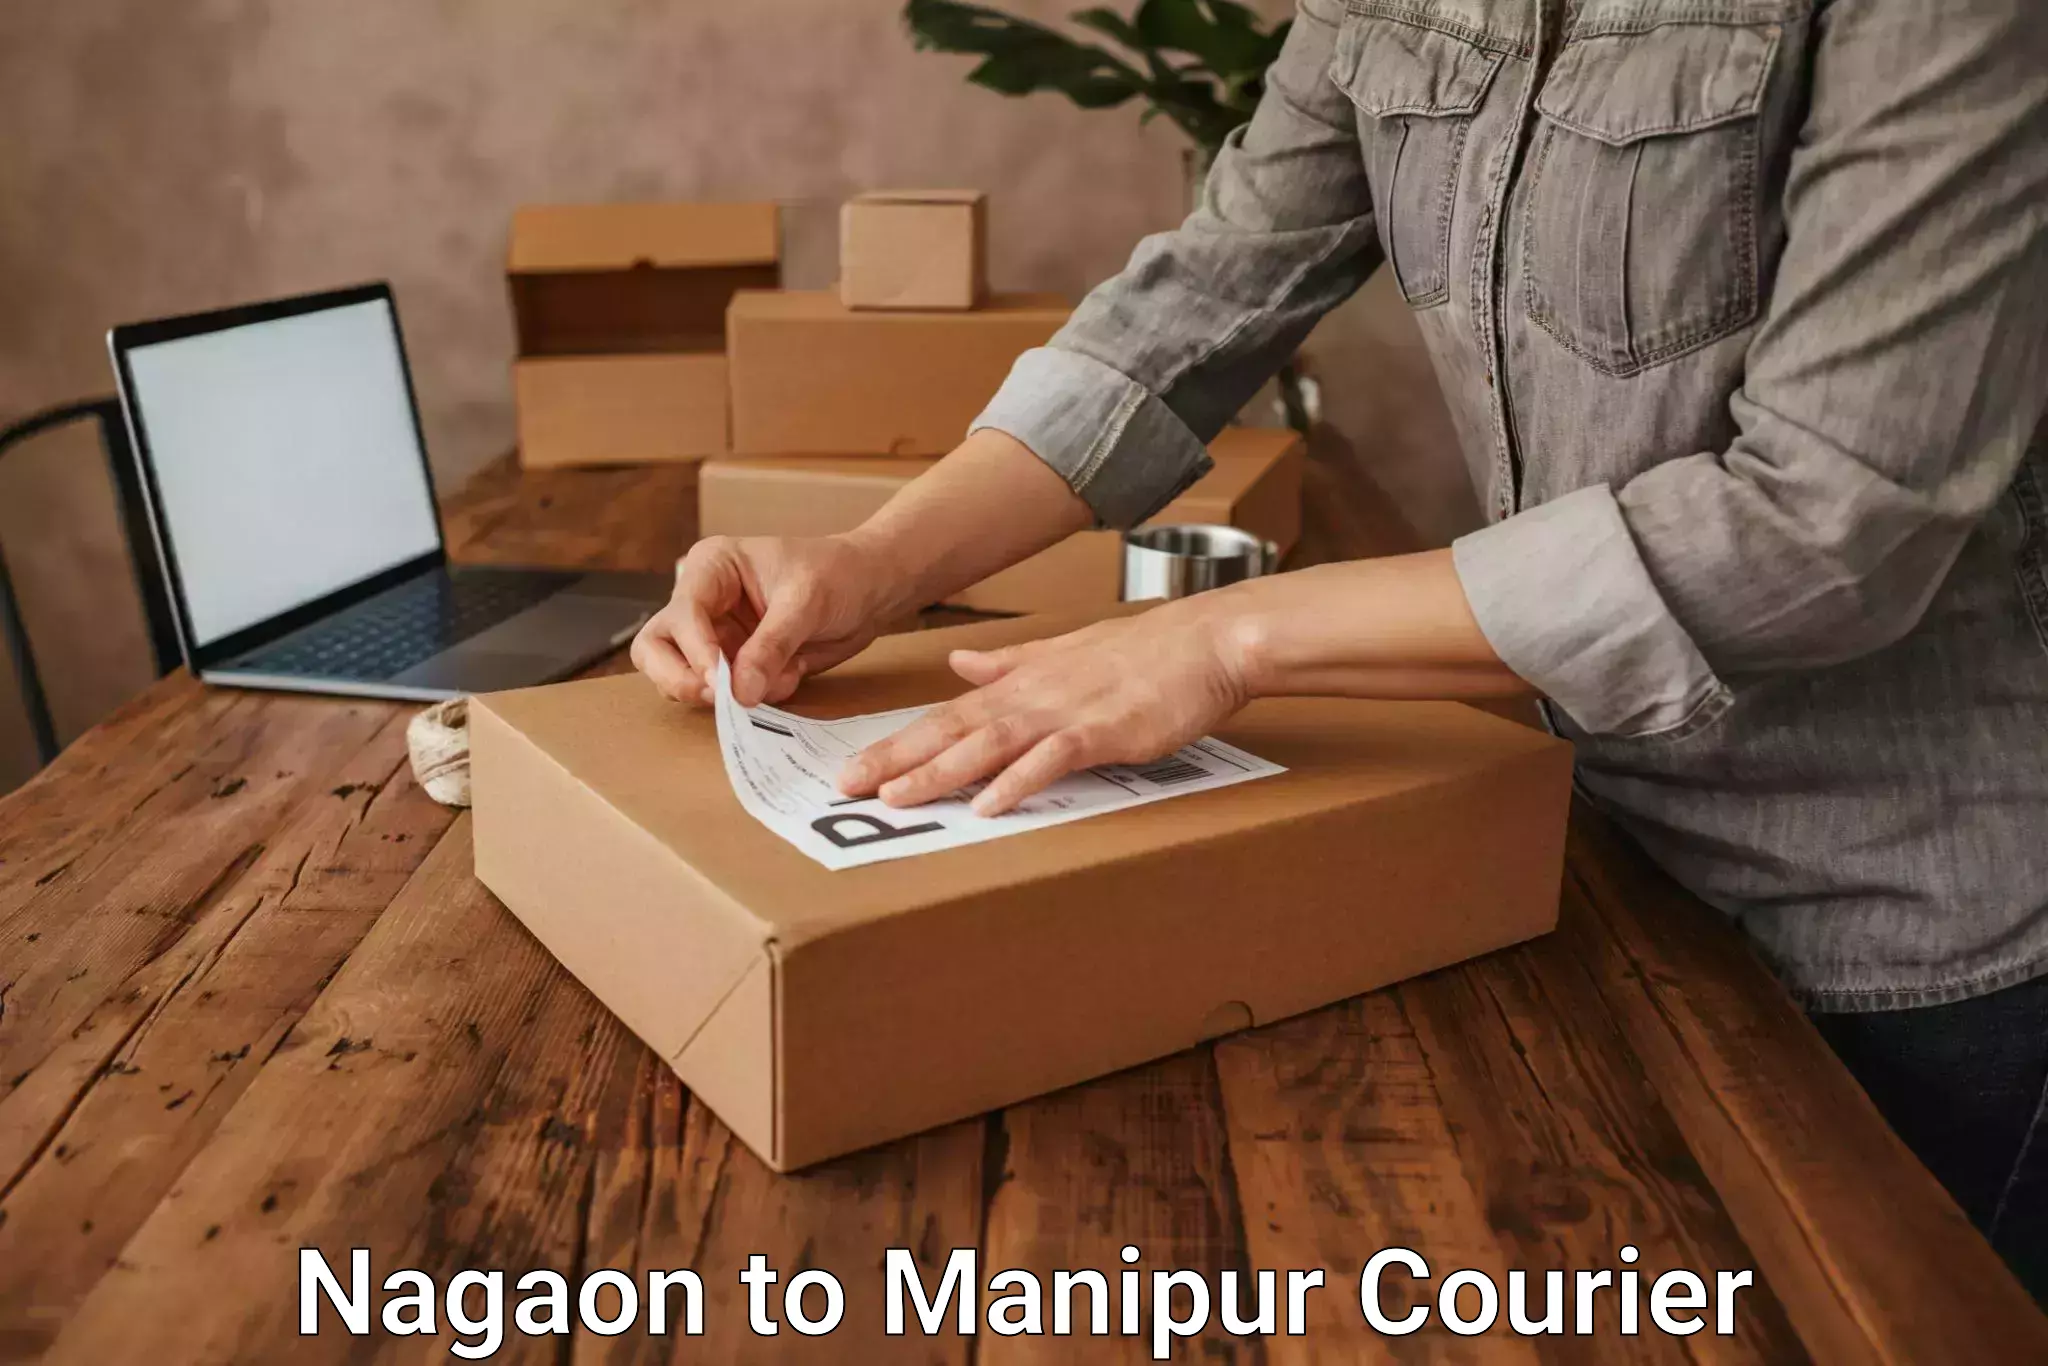 24-hour courier service Nagaon to Kakching